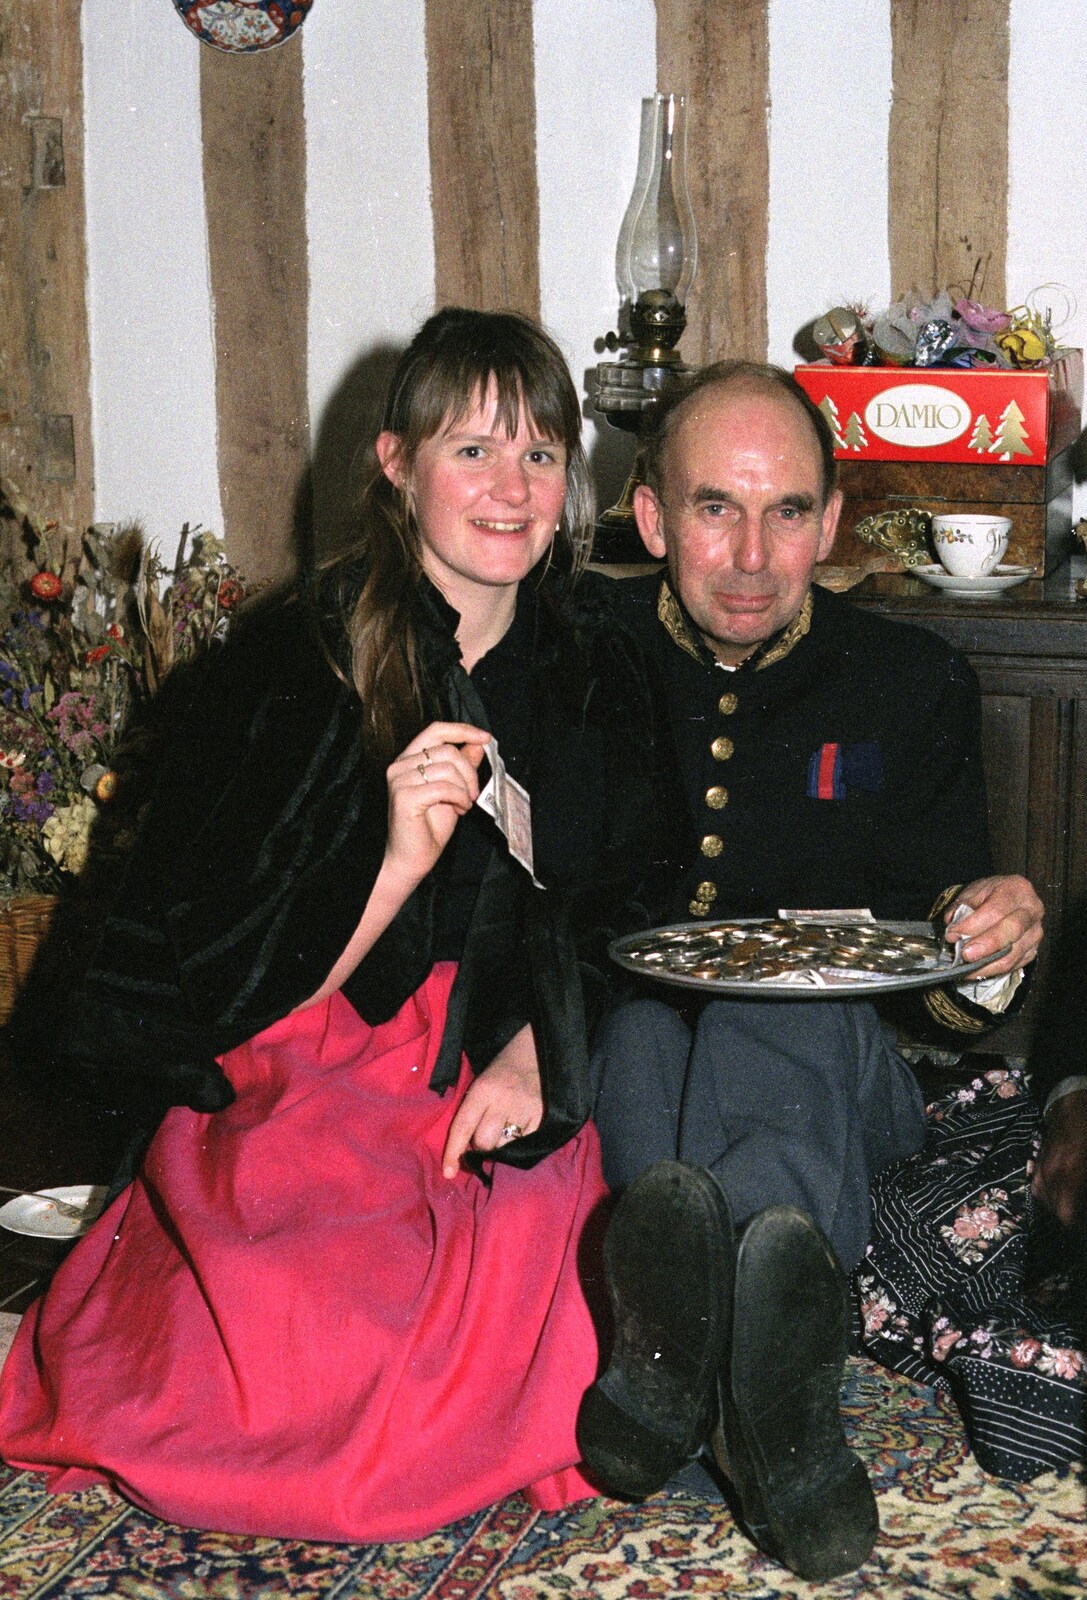 Herbert with a plate of coins from Late Night, and Christmas with the Coxes, Needham, Norfolk - 25th December 1989